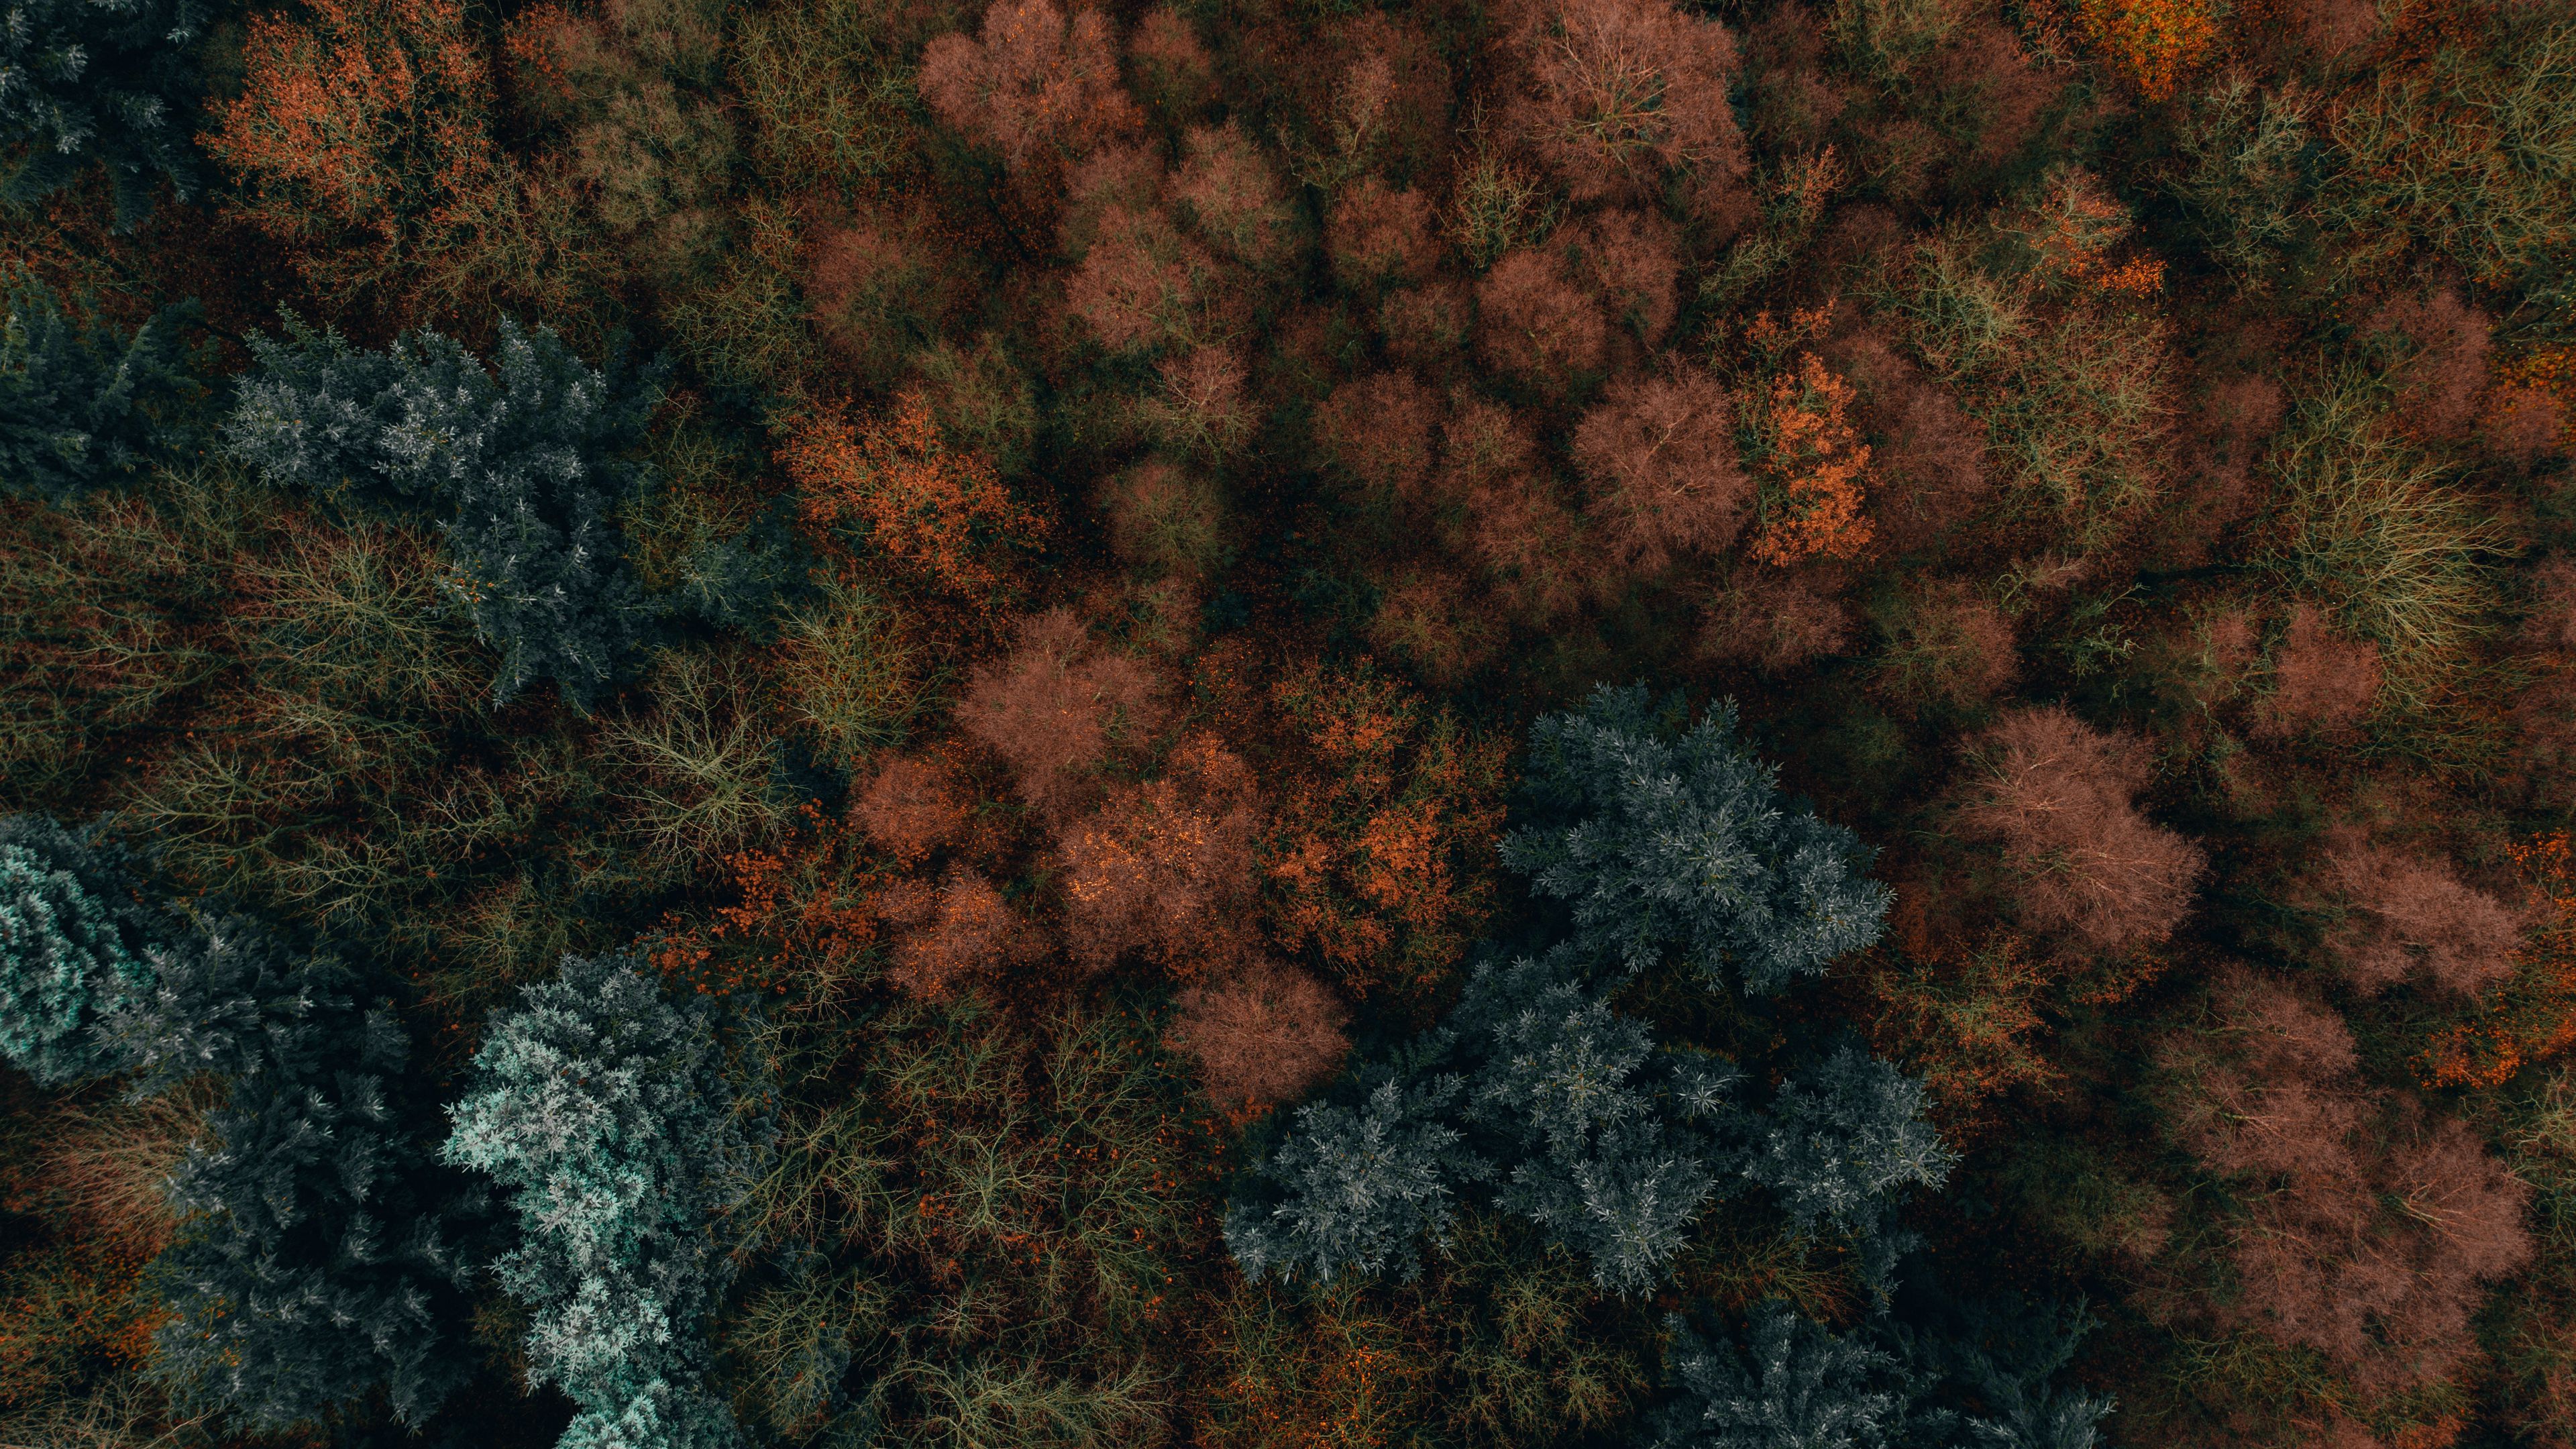 Download wallpaper 3840x2160 autumn, trees, aerial view, forest, autumn colors, vegetation 4k uhd 16:9 HD background